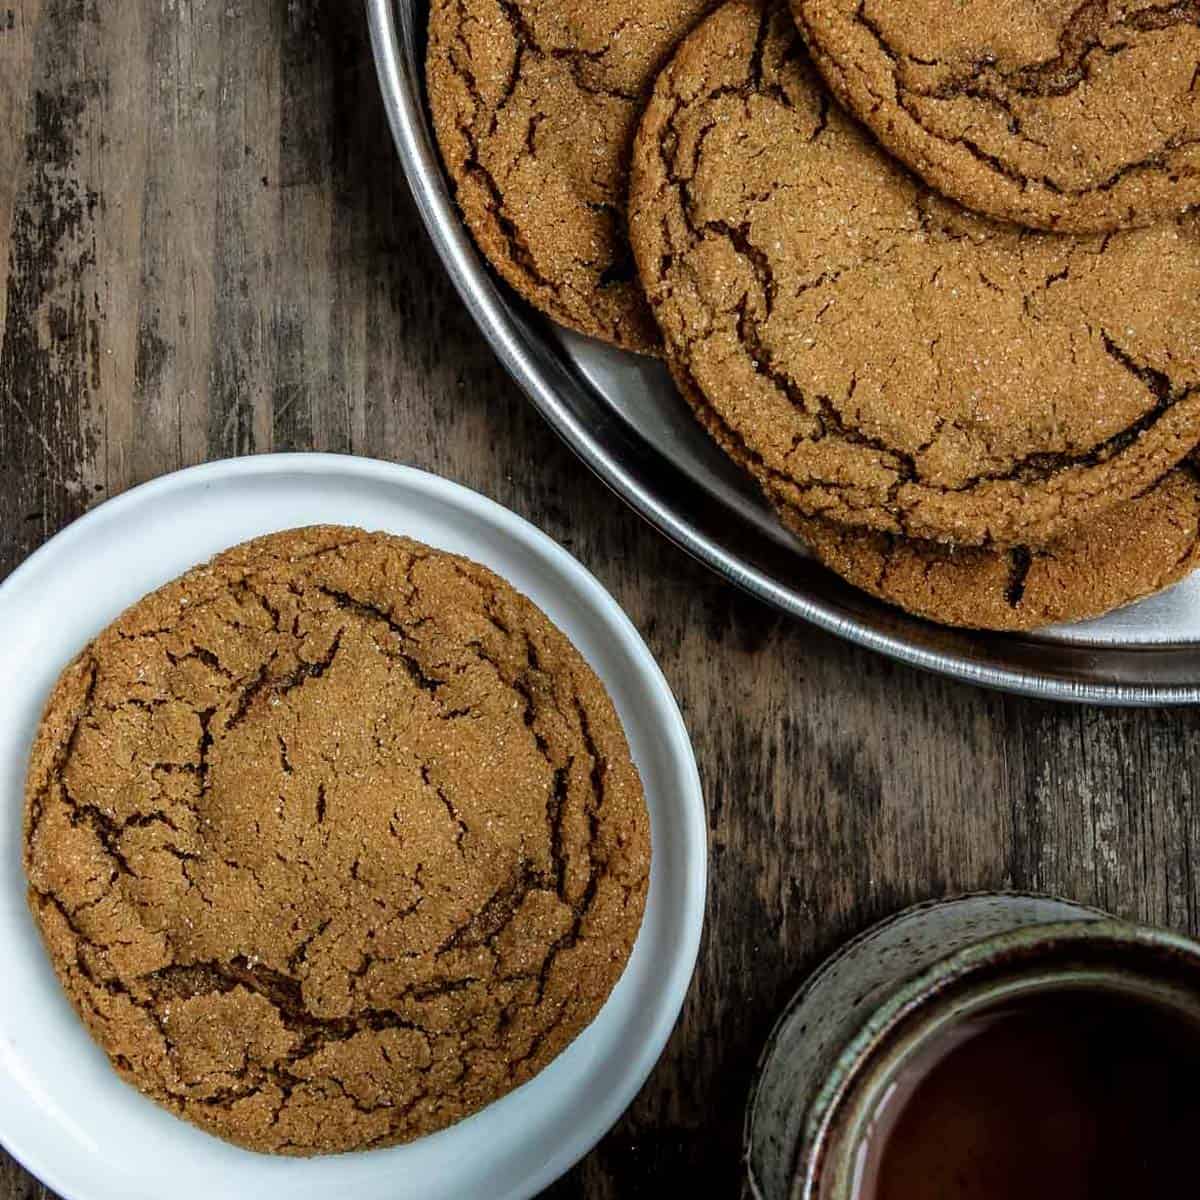 A plate of molasses cookies.